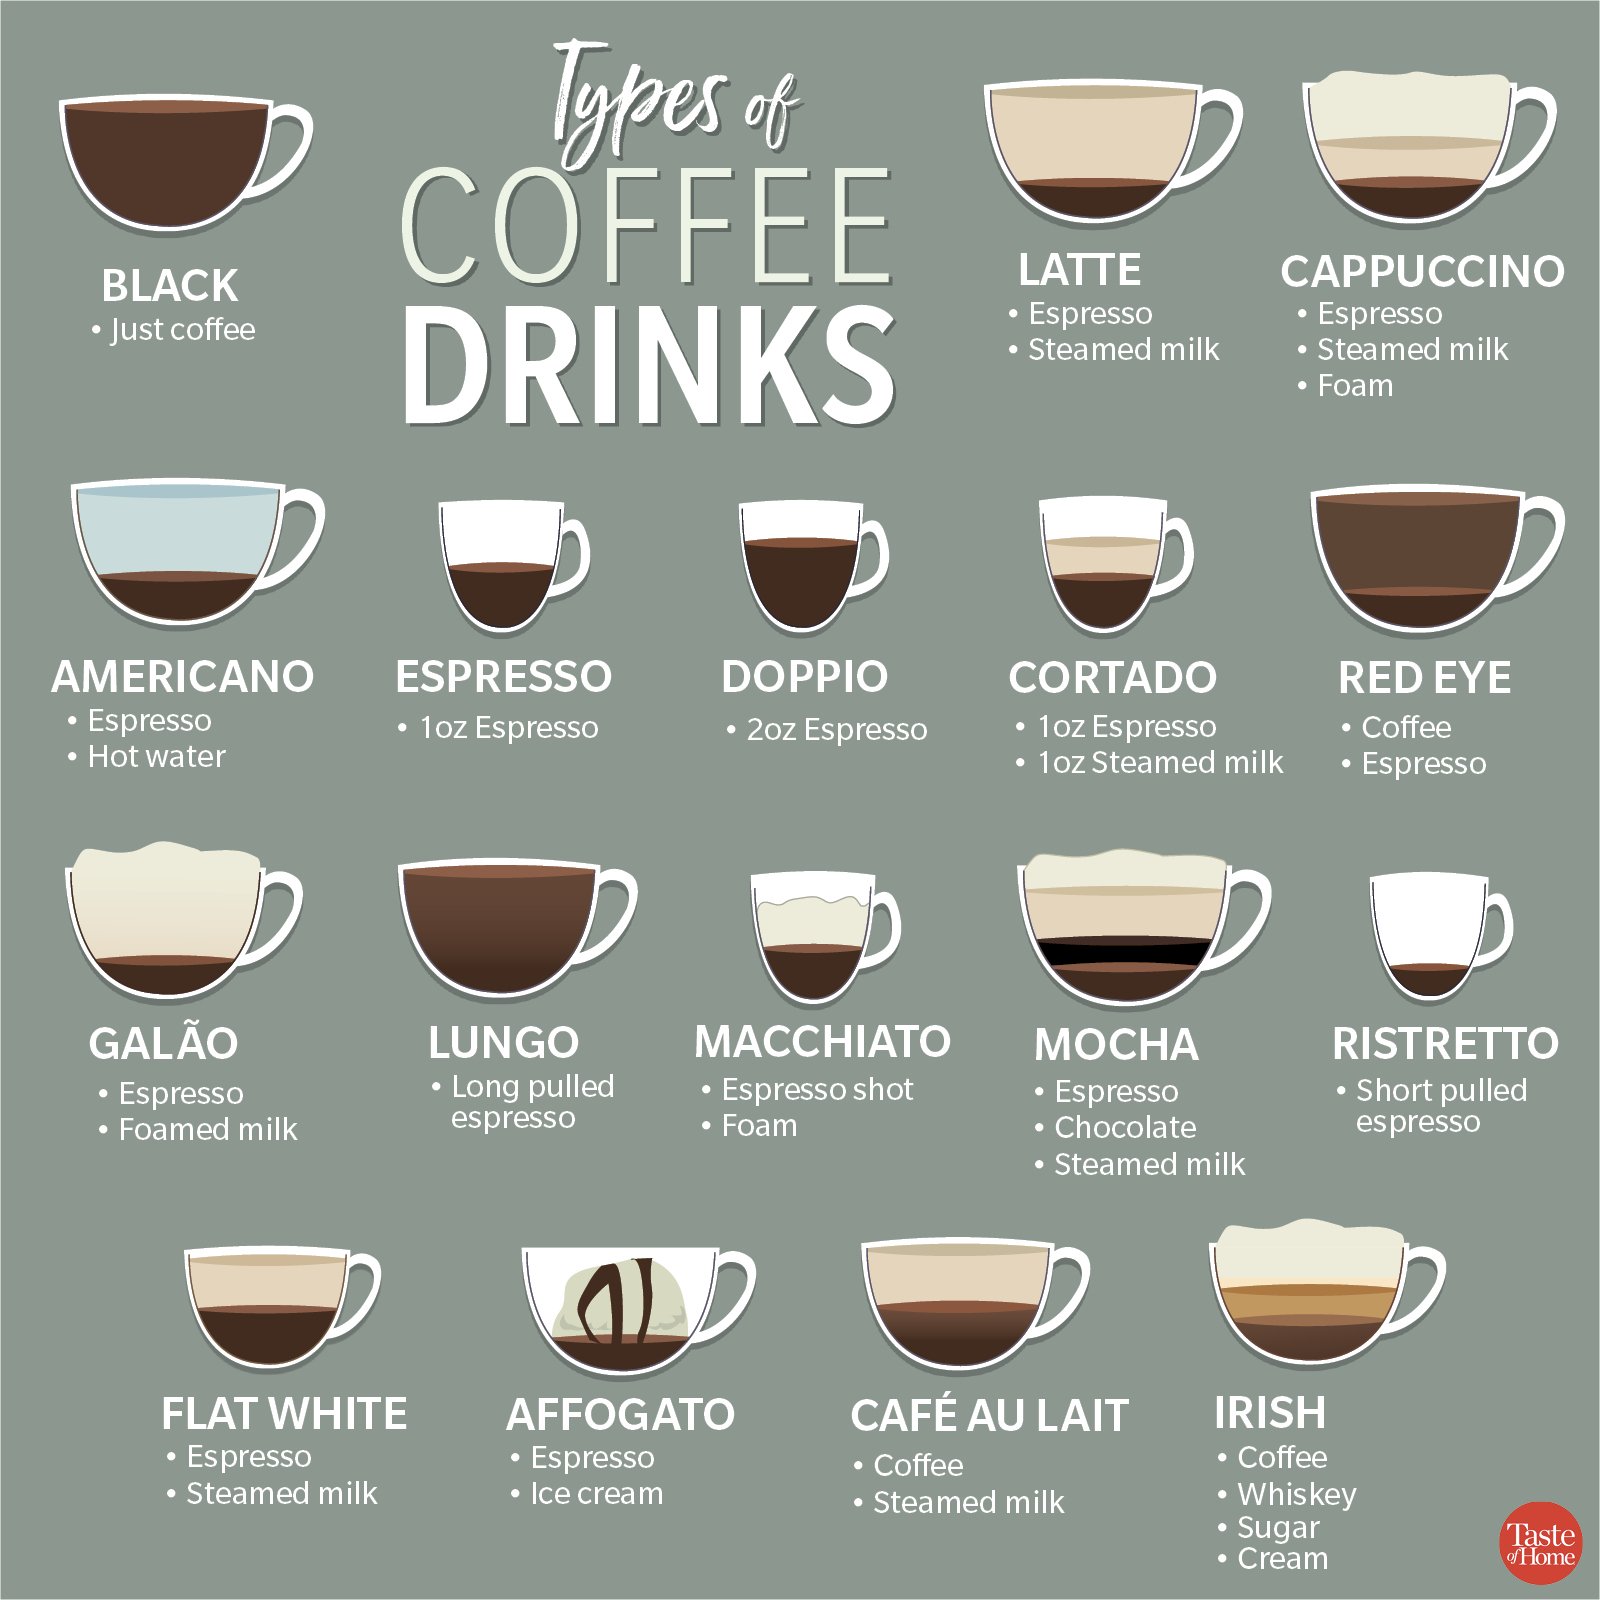 various methods for drinking coffee